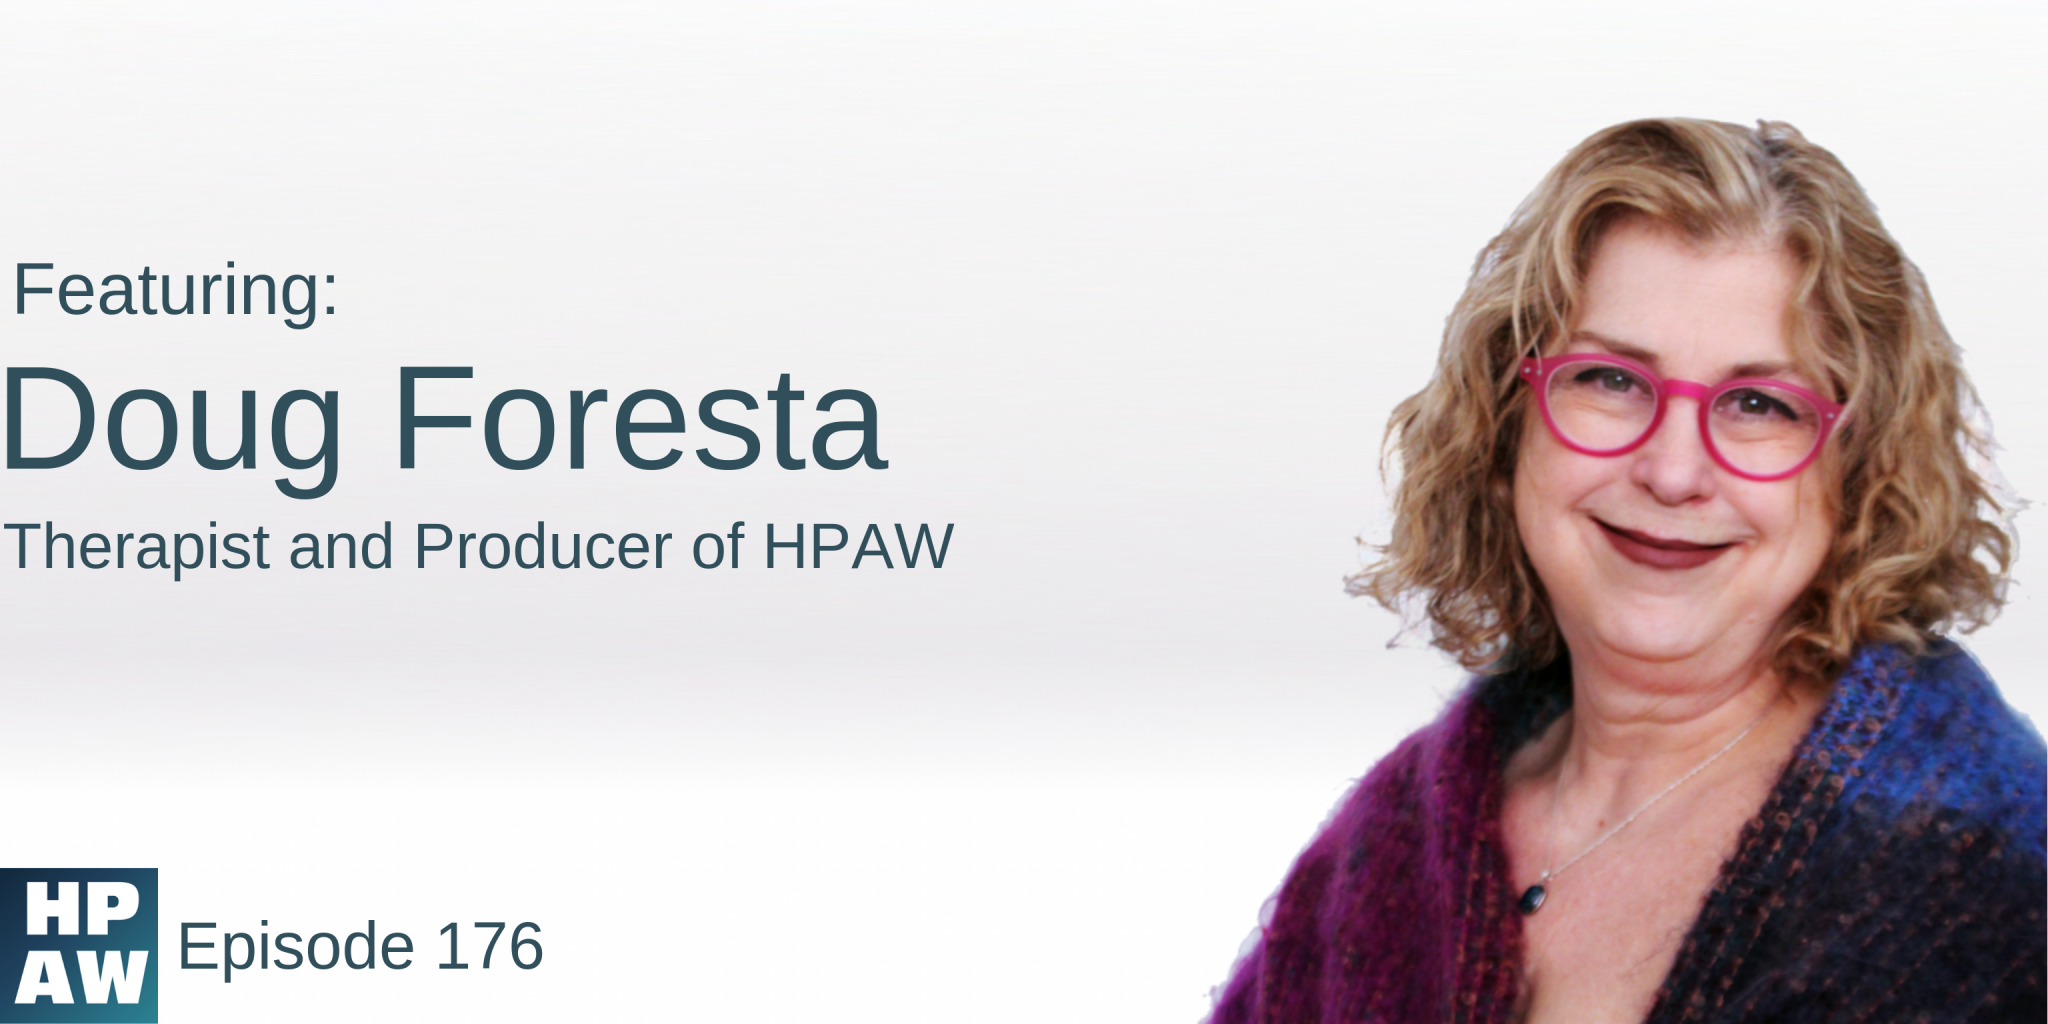 Photo of Debra Ruh, Besides reads: Doug Foresta, Therapist and Producer of HPAW